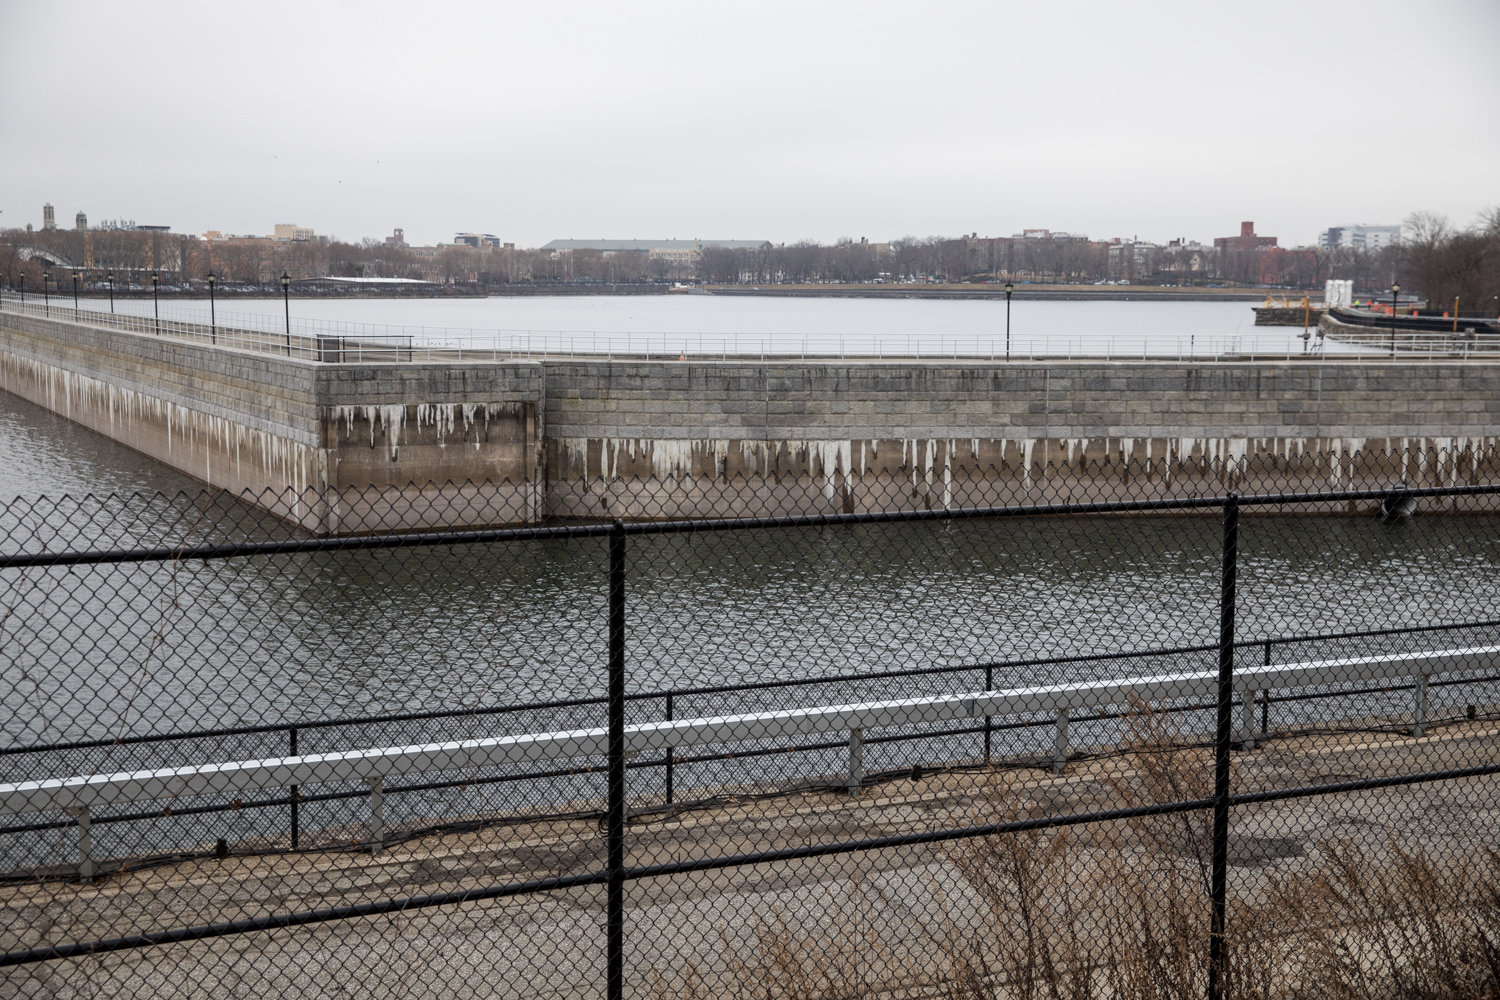 The Jerome Park Reservoir is an ongoing battleground between community members and DEP, although residents have notched a victory. The State Historic Preservation Office withdrew its endorsement of the agency’s project for the reservoir in a Feb. 13 letter.